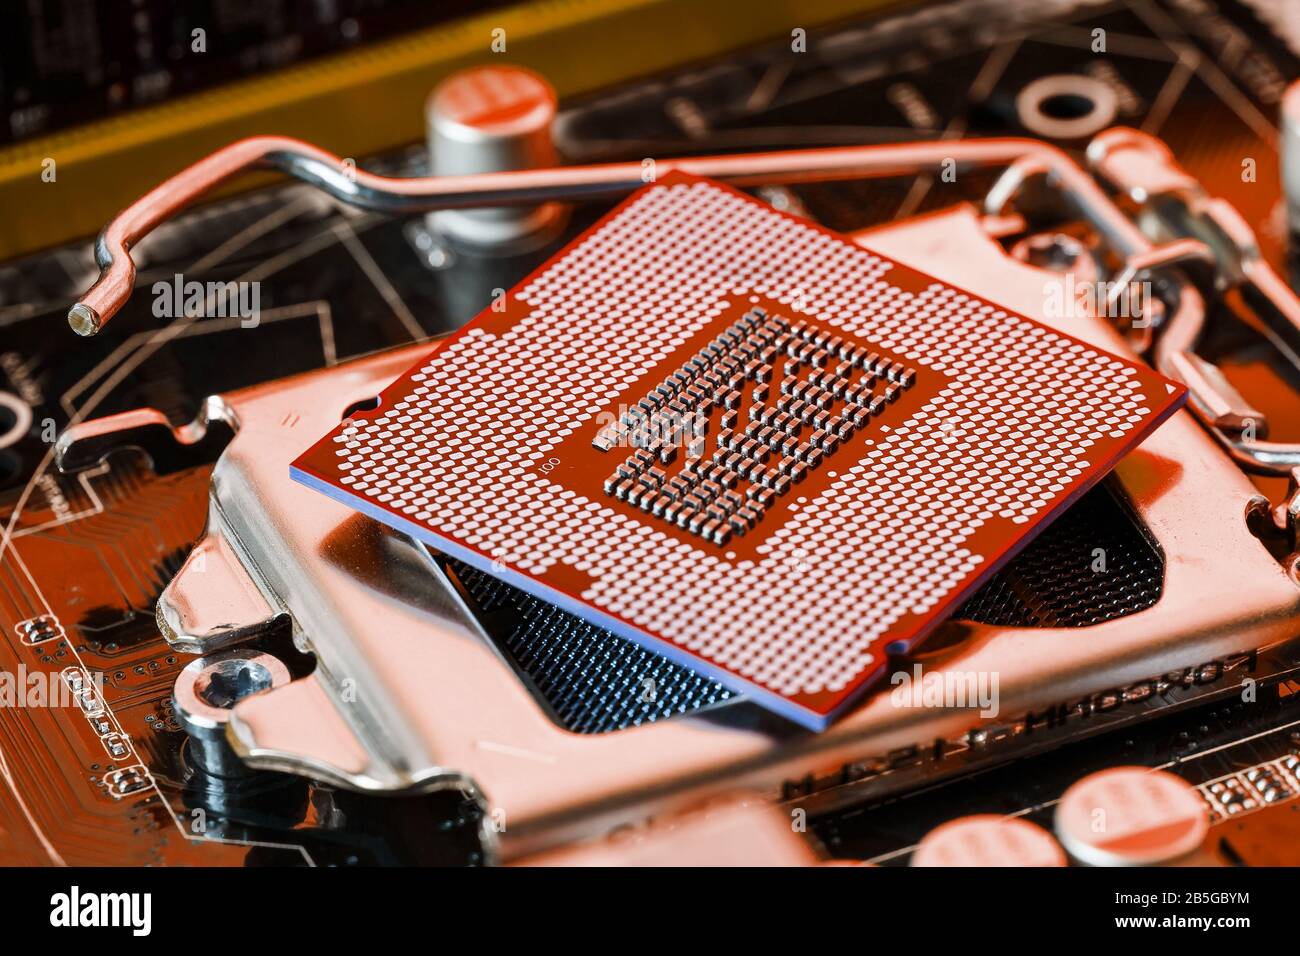 The central processor on the computer motherboard in red colors. PC repair, technician and industry support concept. Stock Photo